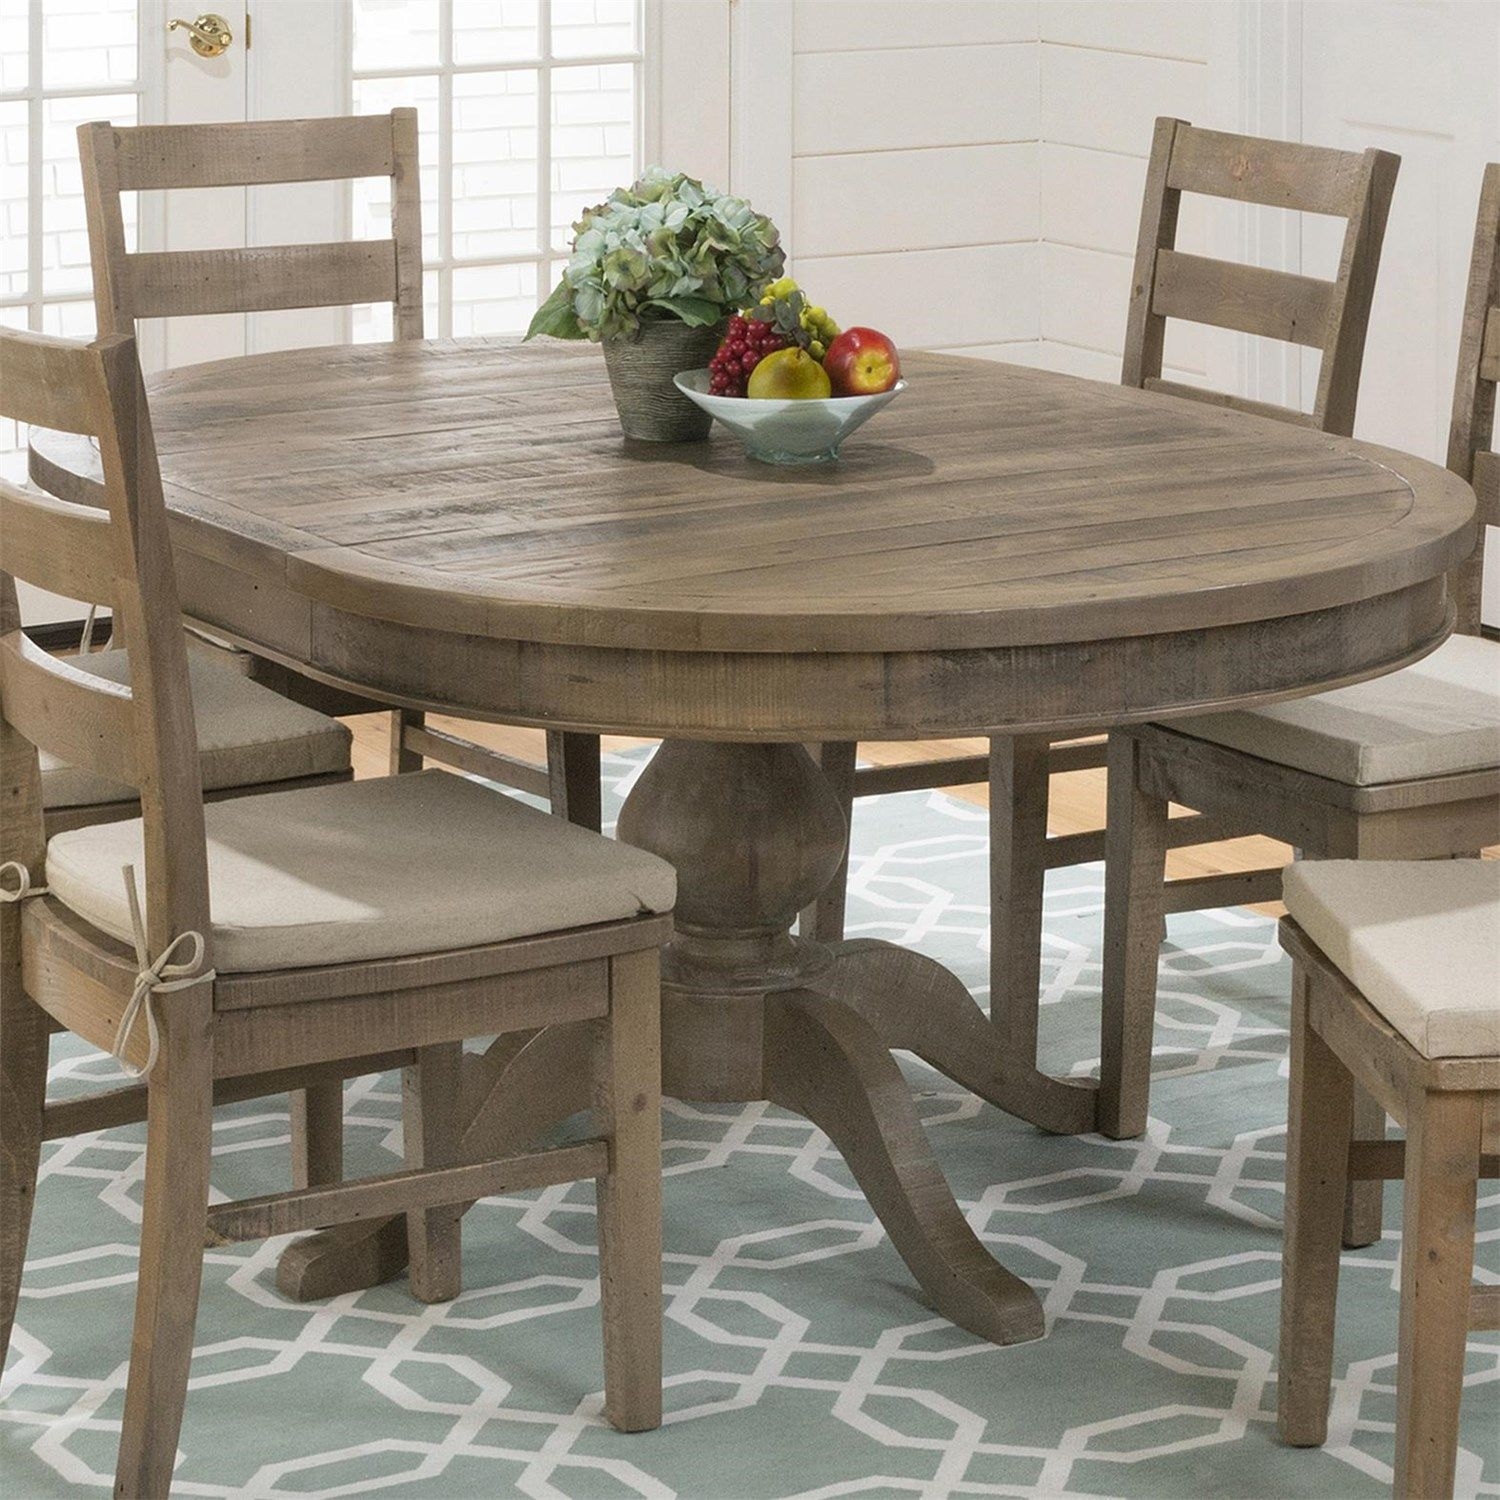 Jofran Slater Mill Pine Oval Dining Table